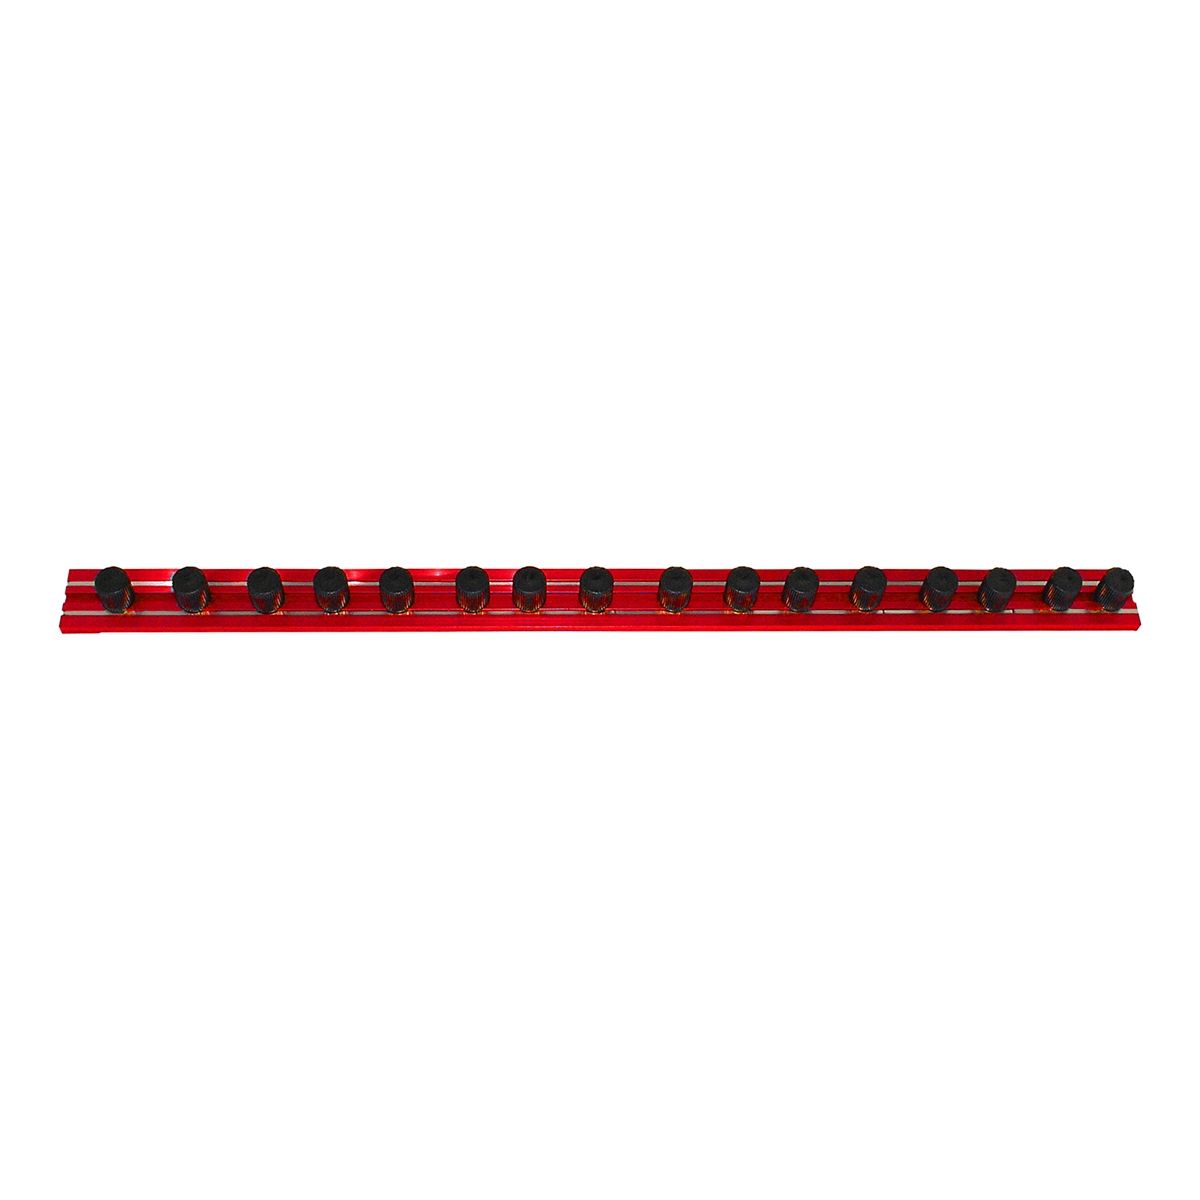 MAGRAIL TL 16 In Long 16-1/2" Studs Red